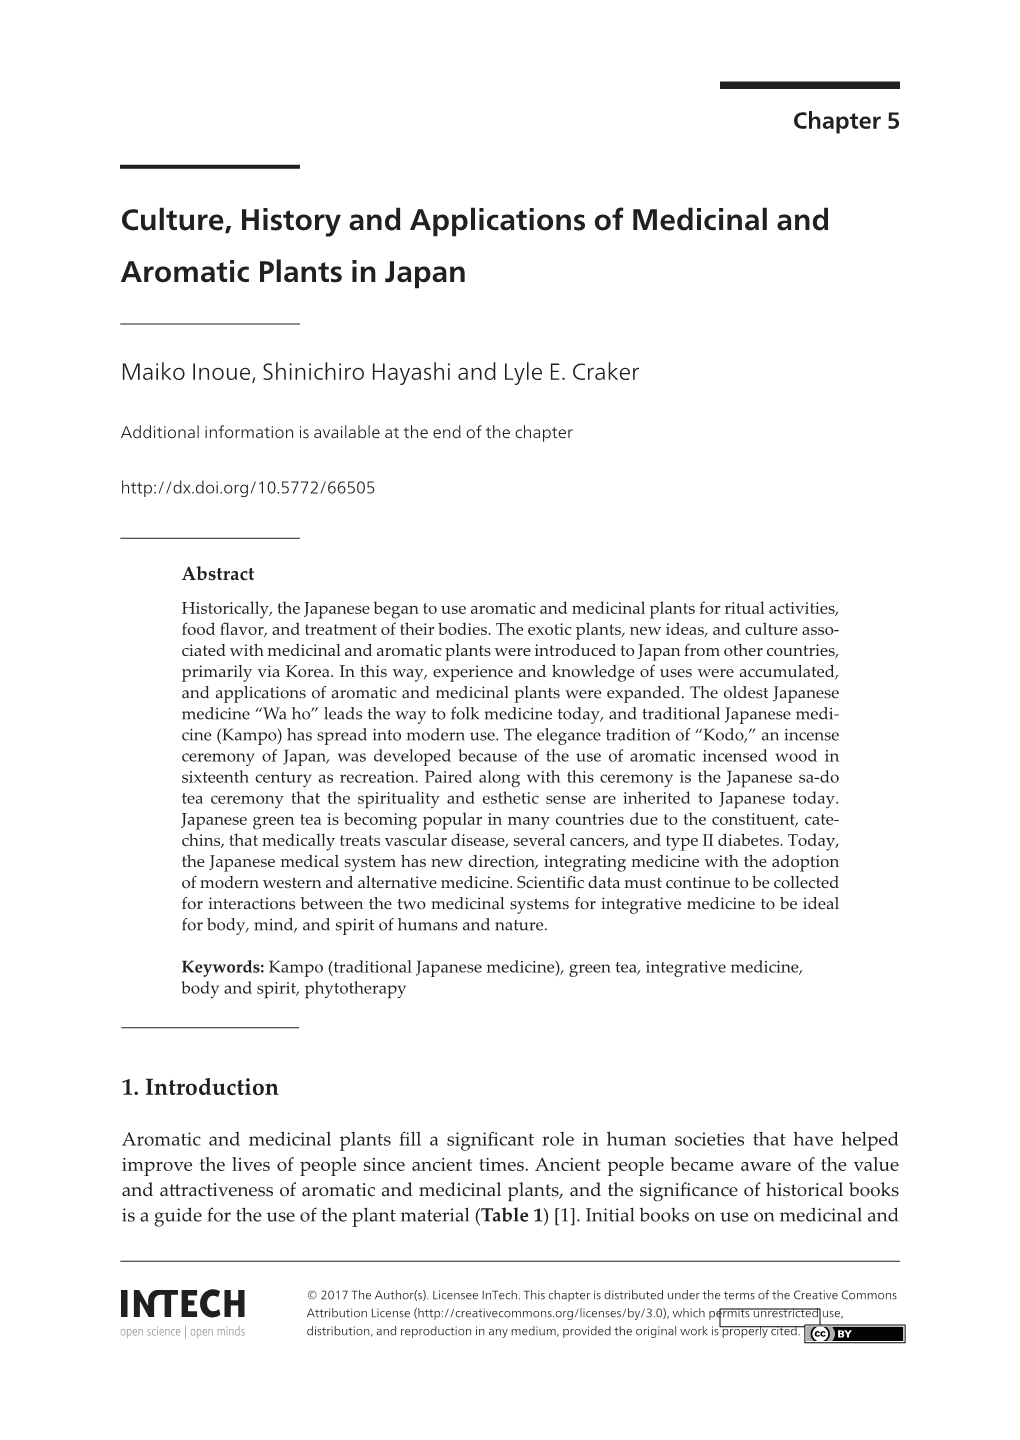 Culture, History and Applications of Medicinal and Aromatic Plants in Japan Maiko Inoue, Shinichiro Hayashi and Lyle E